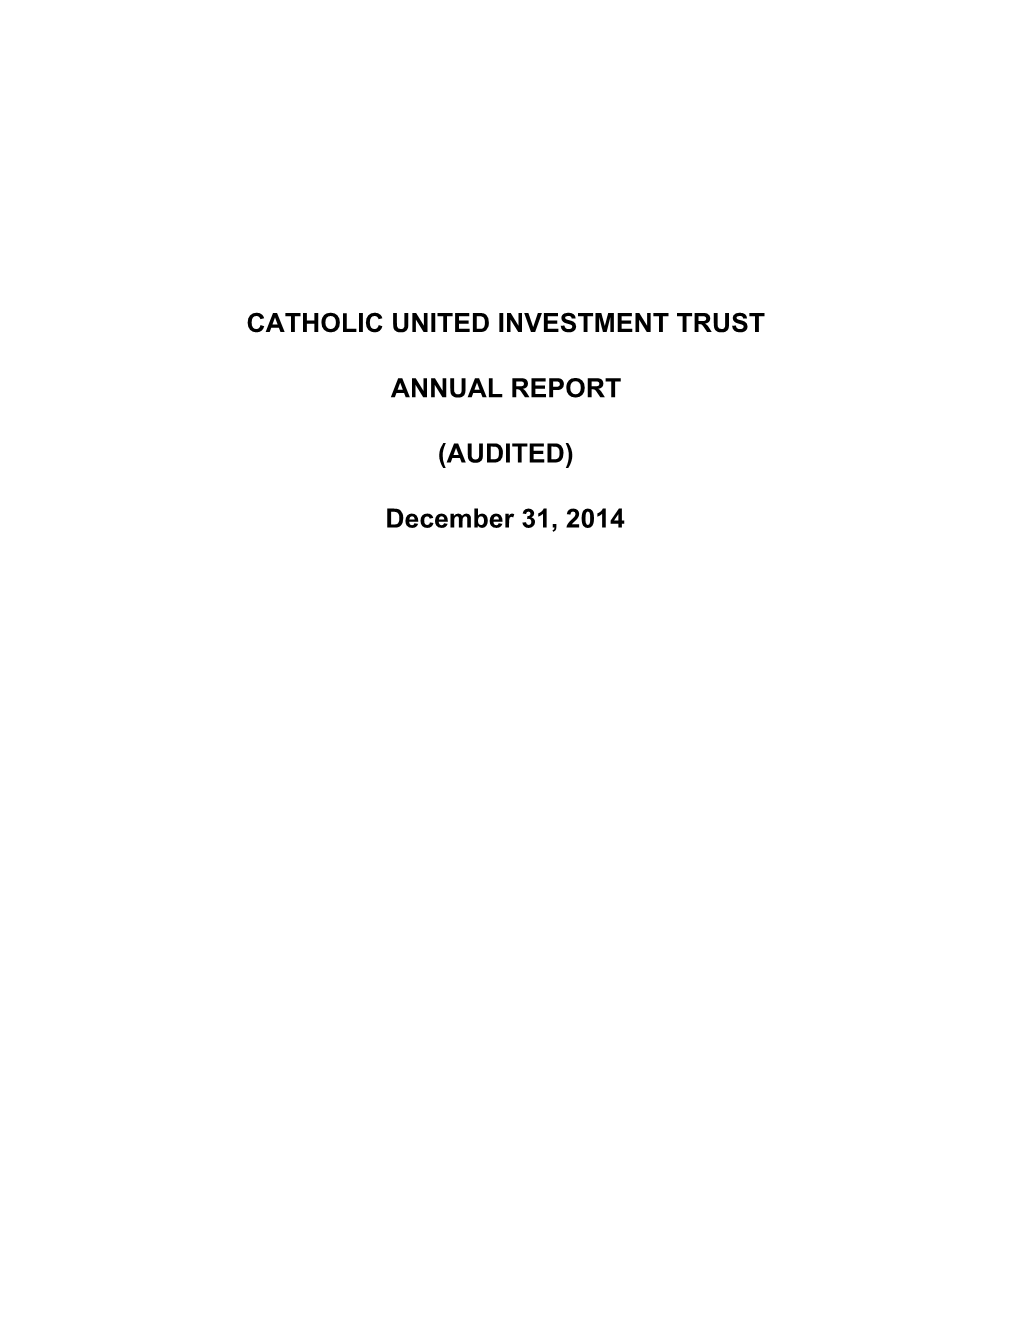 Copy of CUIT Annual Report 123114 Formatted 2.Xlsx